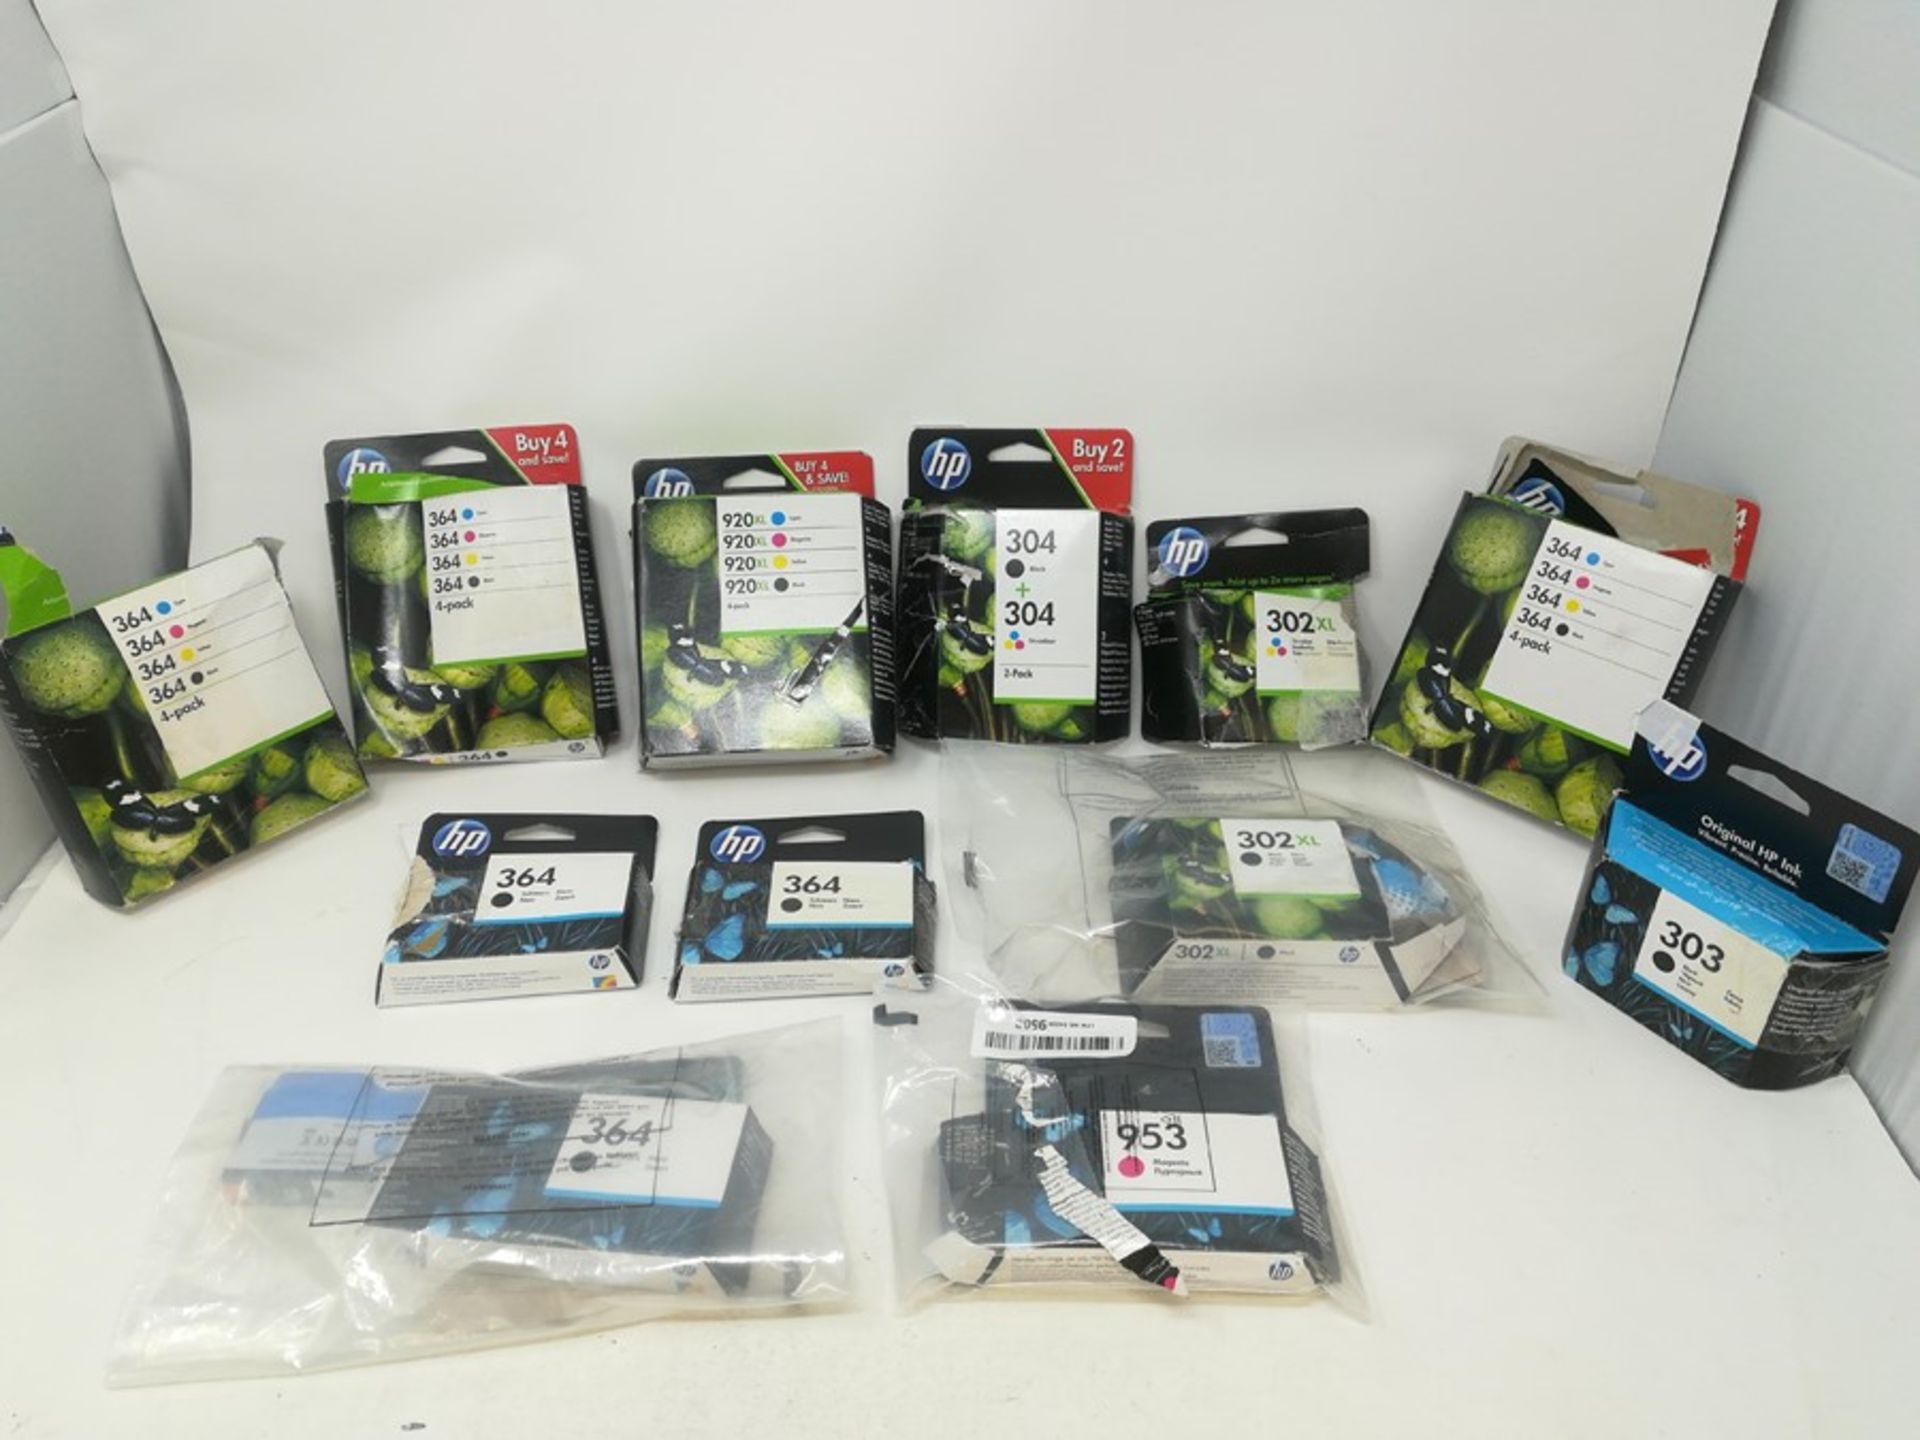 COMBINED RRP £327.00 LOT TO CONTAIN 12 ASSORTED Cardriges Products: HP, HP, HP, HP, HP, HP, HP, HP